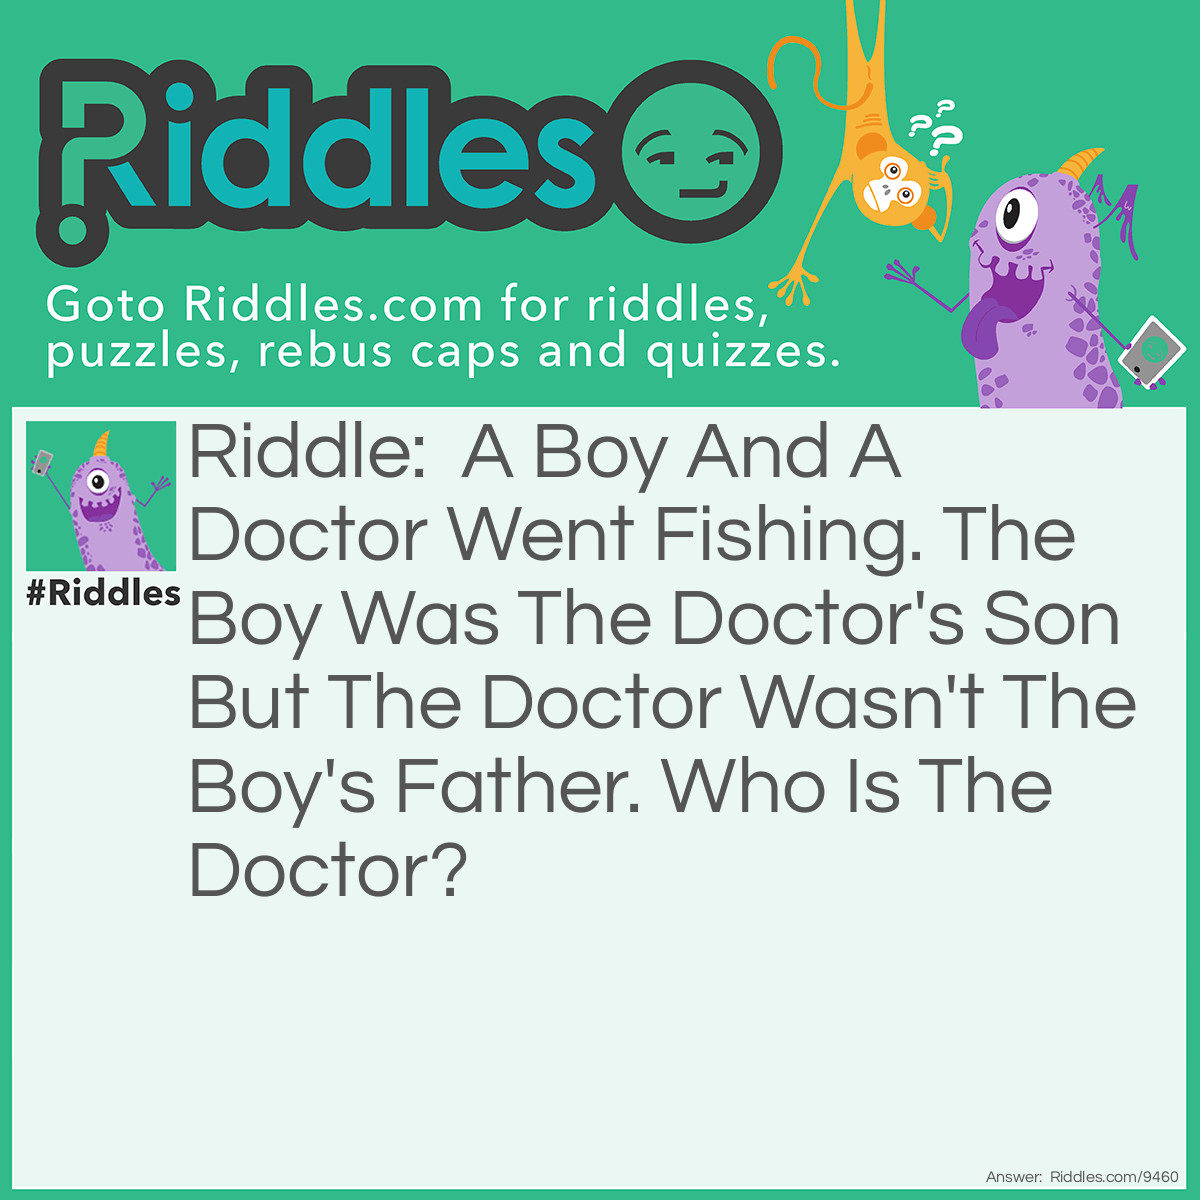 Riddle: A Boy And A Doctor Went Fishing. The Boy Was The Doctor's Son But The Doctor Wasn't The Boy's Father. Who Is The Doctor? Answer: His mother.